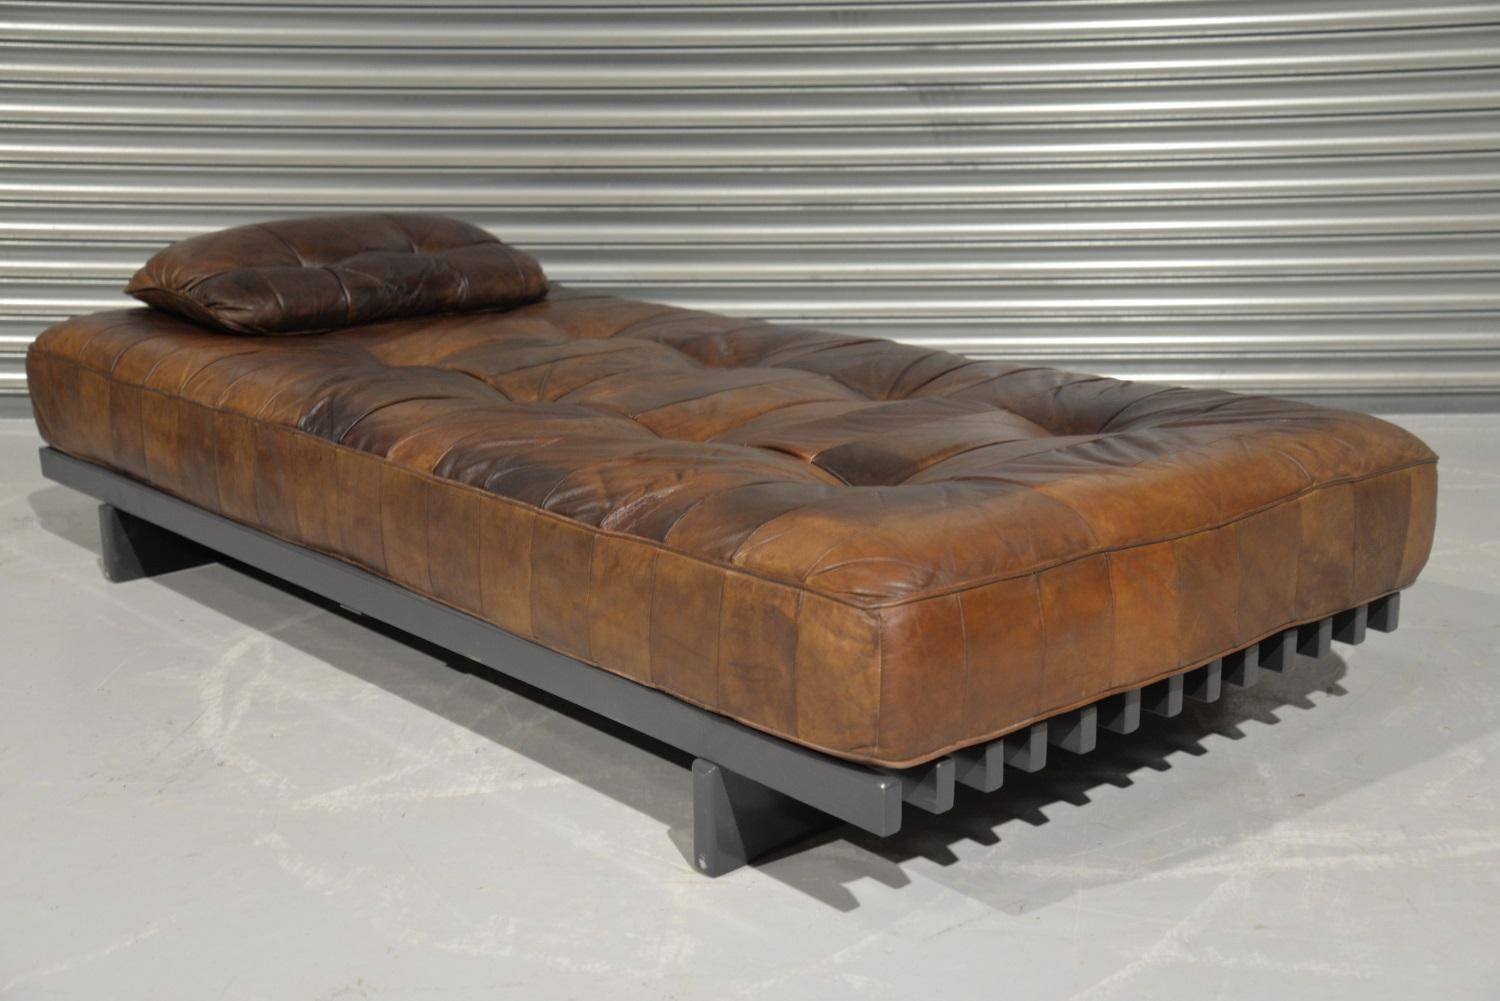 Discounted airfreight for our US Continent customers (from 2 weeks door to door)

We are delighted to bring to a rare De Sede DS 80 patchwork leather daybed with patchwork cushion. Hand built in the 1960s by De Sede craftsman in Switzerland, the